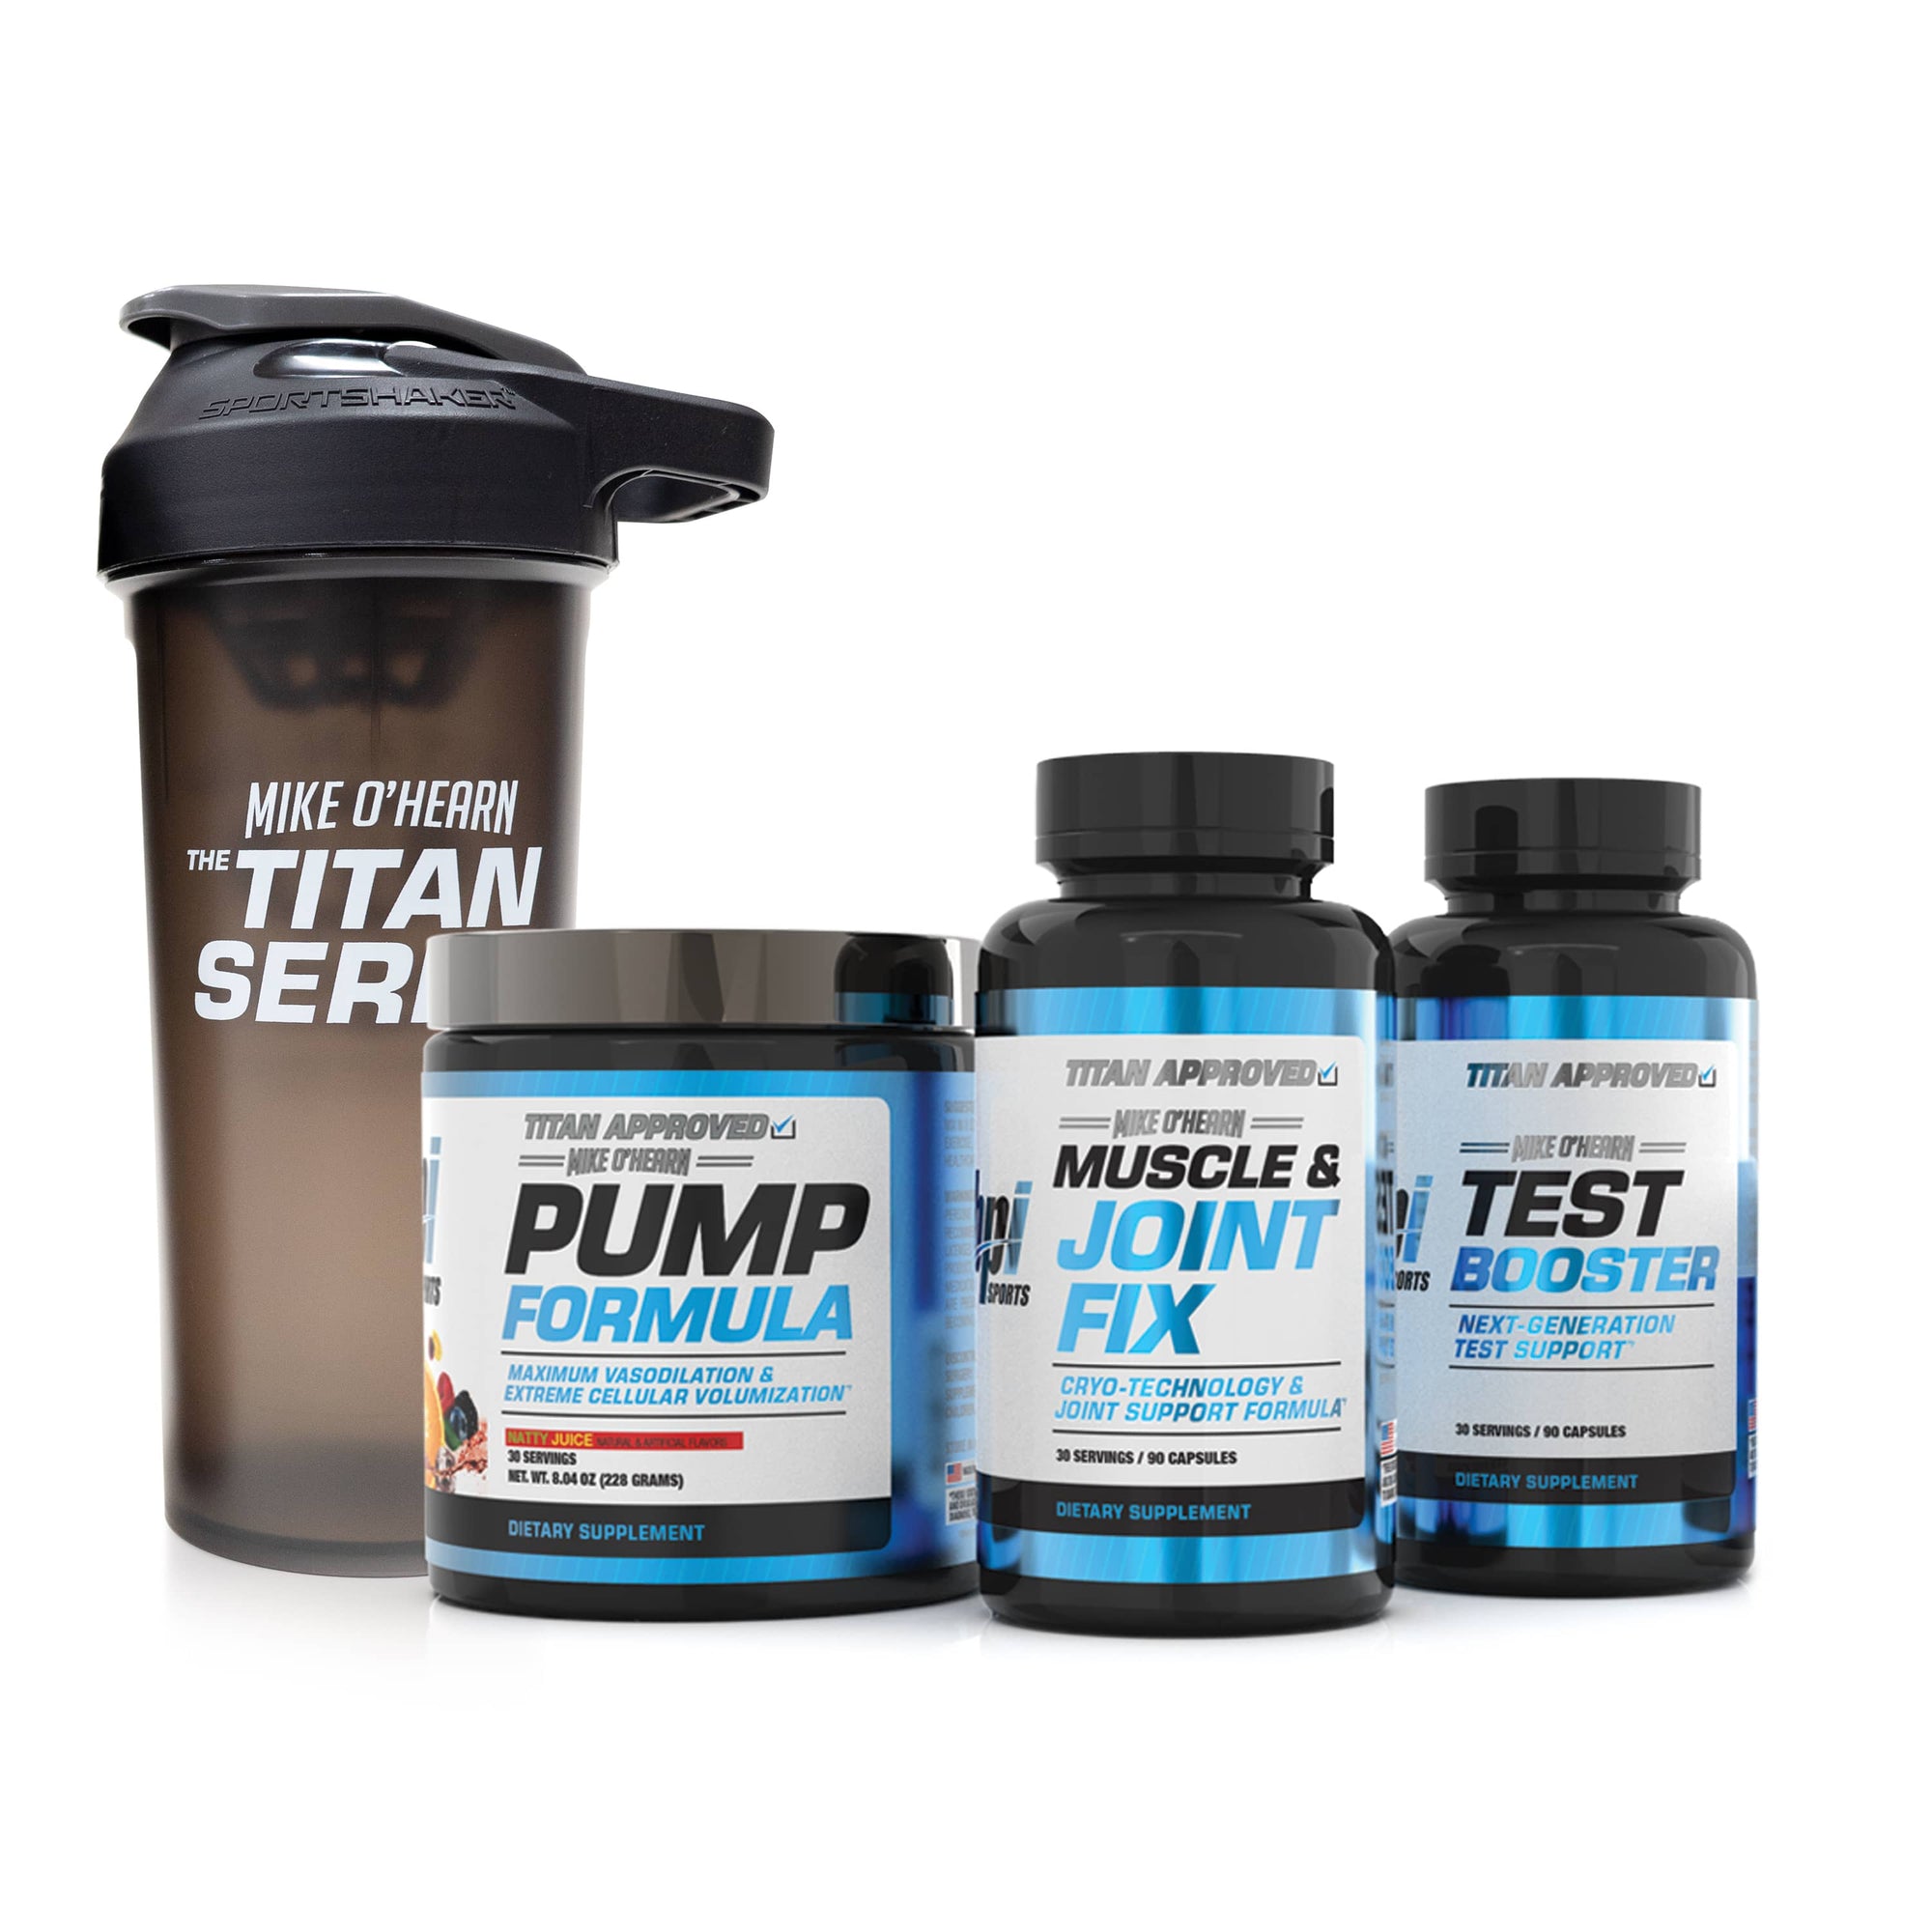 Mike O'Hearn Super bundle. Includes: PUMP FORMULA container / TEST BOOSTER bottle / MUSCLE & JOINT FIX bottle / MIKE O'HEARN TITAN SERIES SHAKER CUP  Natty Juice